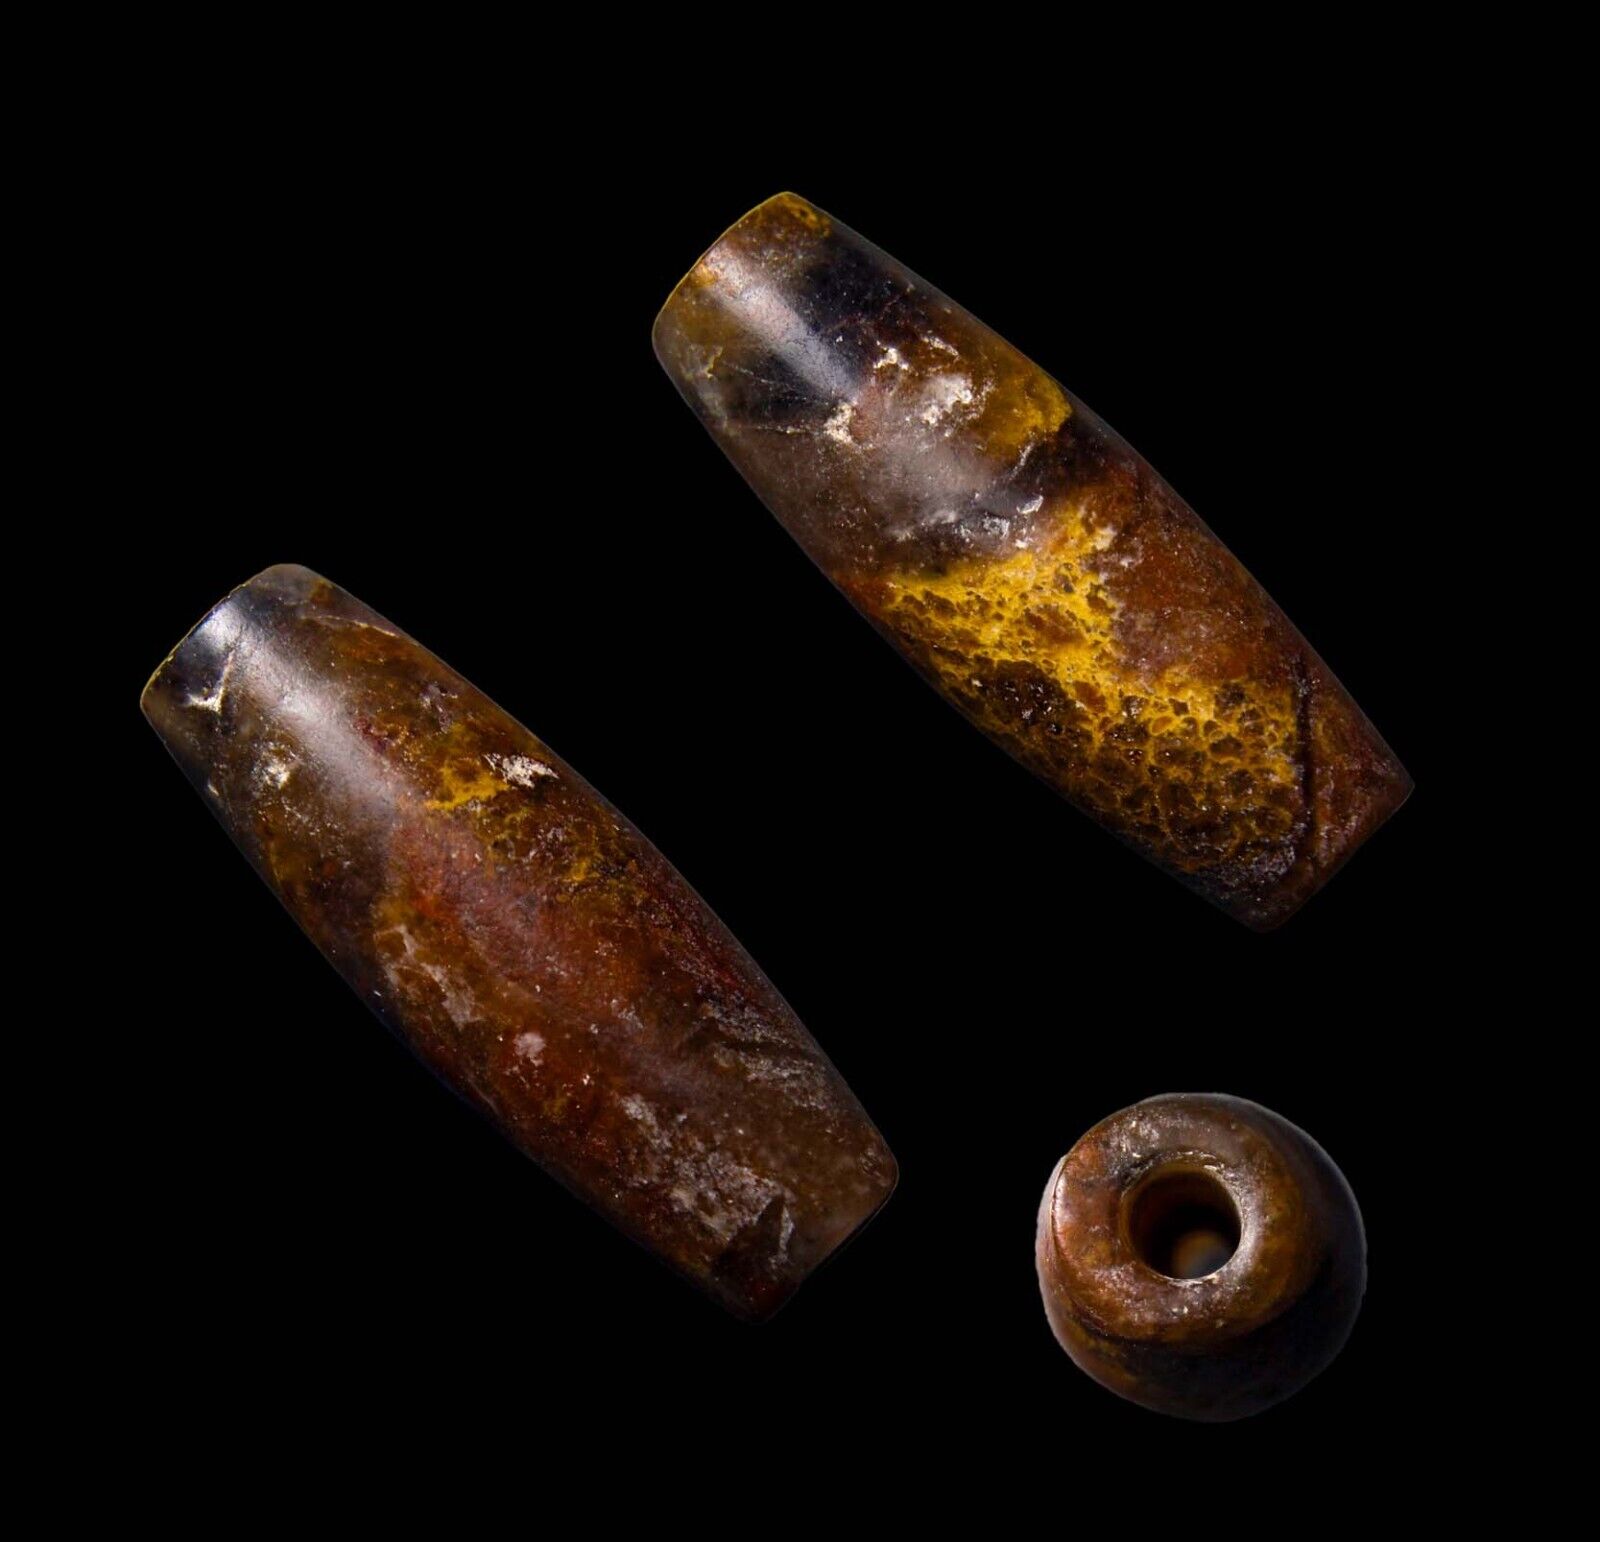 CERTIFIED AUTHENTIC Ancient 1000 Years Old Ancient Roman Agate Stone Bead wCOA